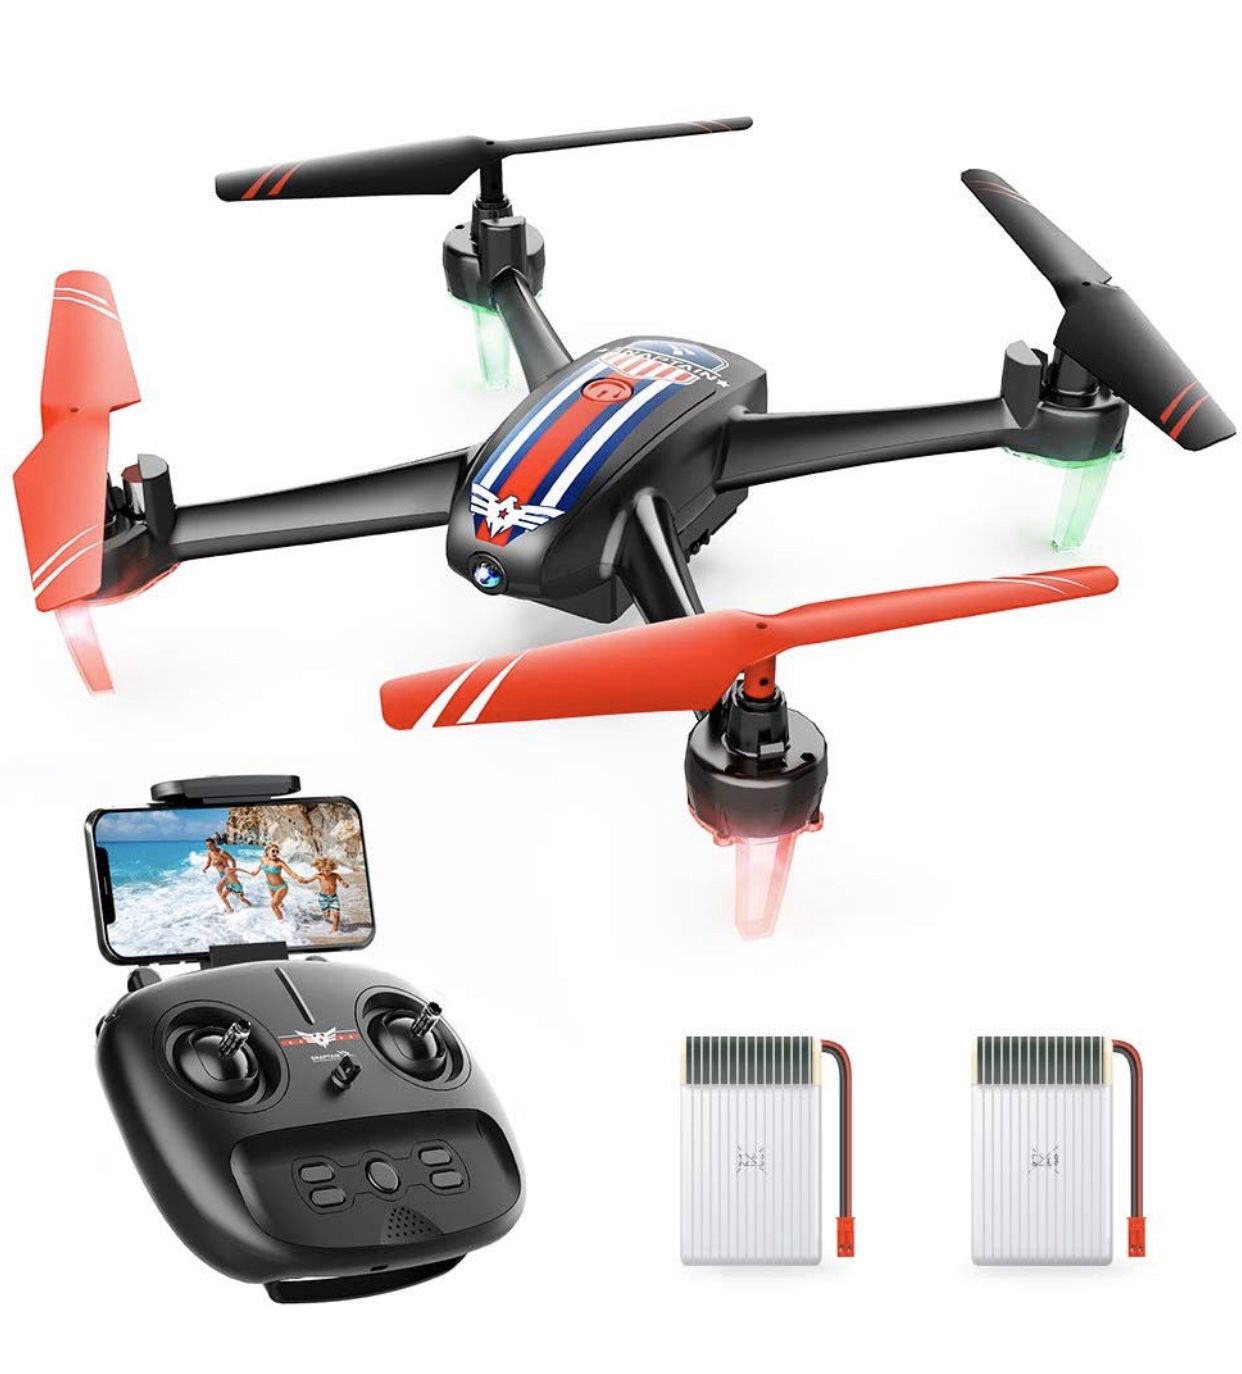 SNAPTAIN SP660 FPV RC drone with camera, 720P HD WiFi live video quadcopter with long flight time, voice control, gesture control, application suppor